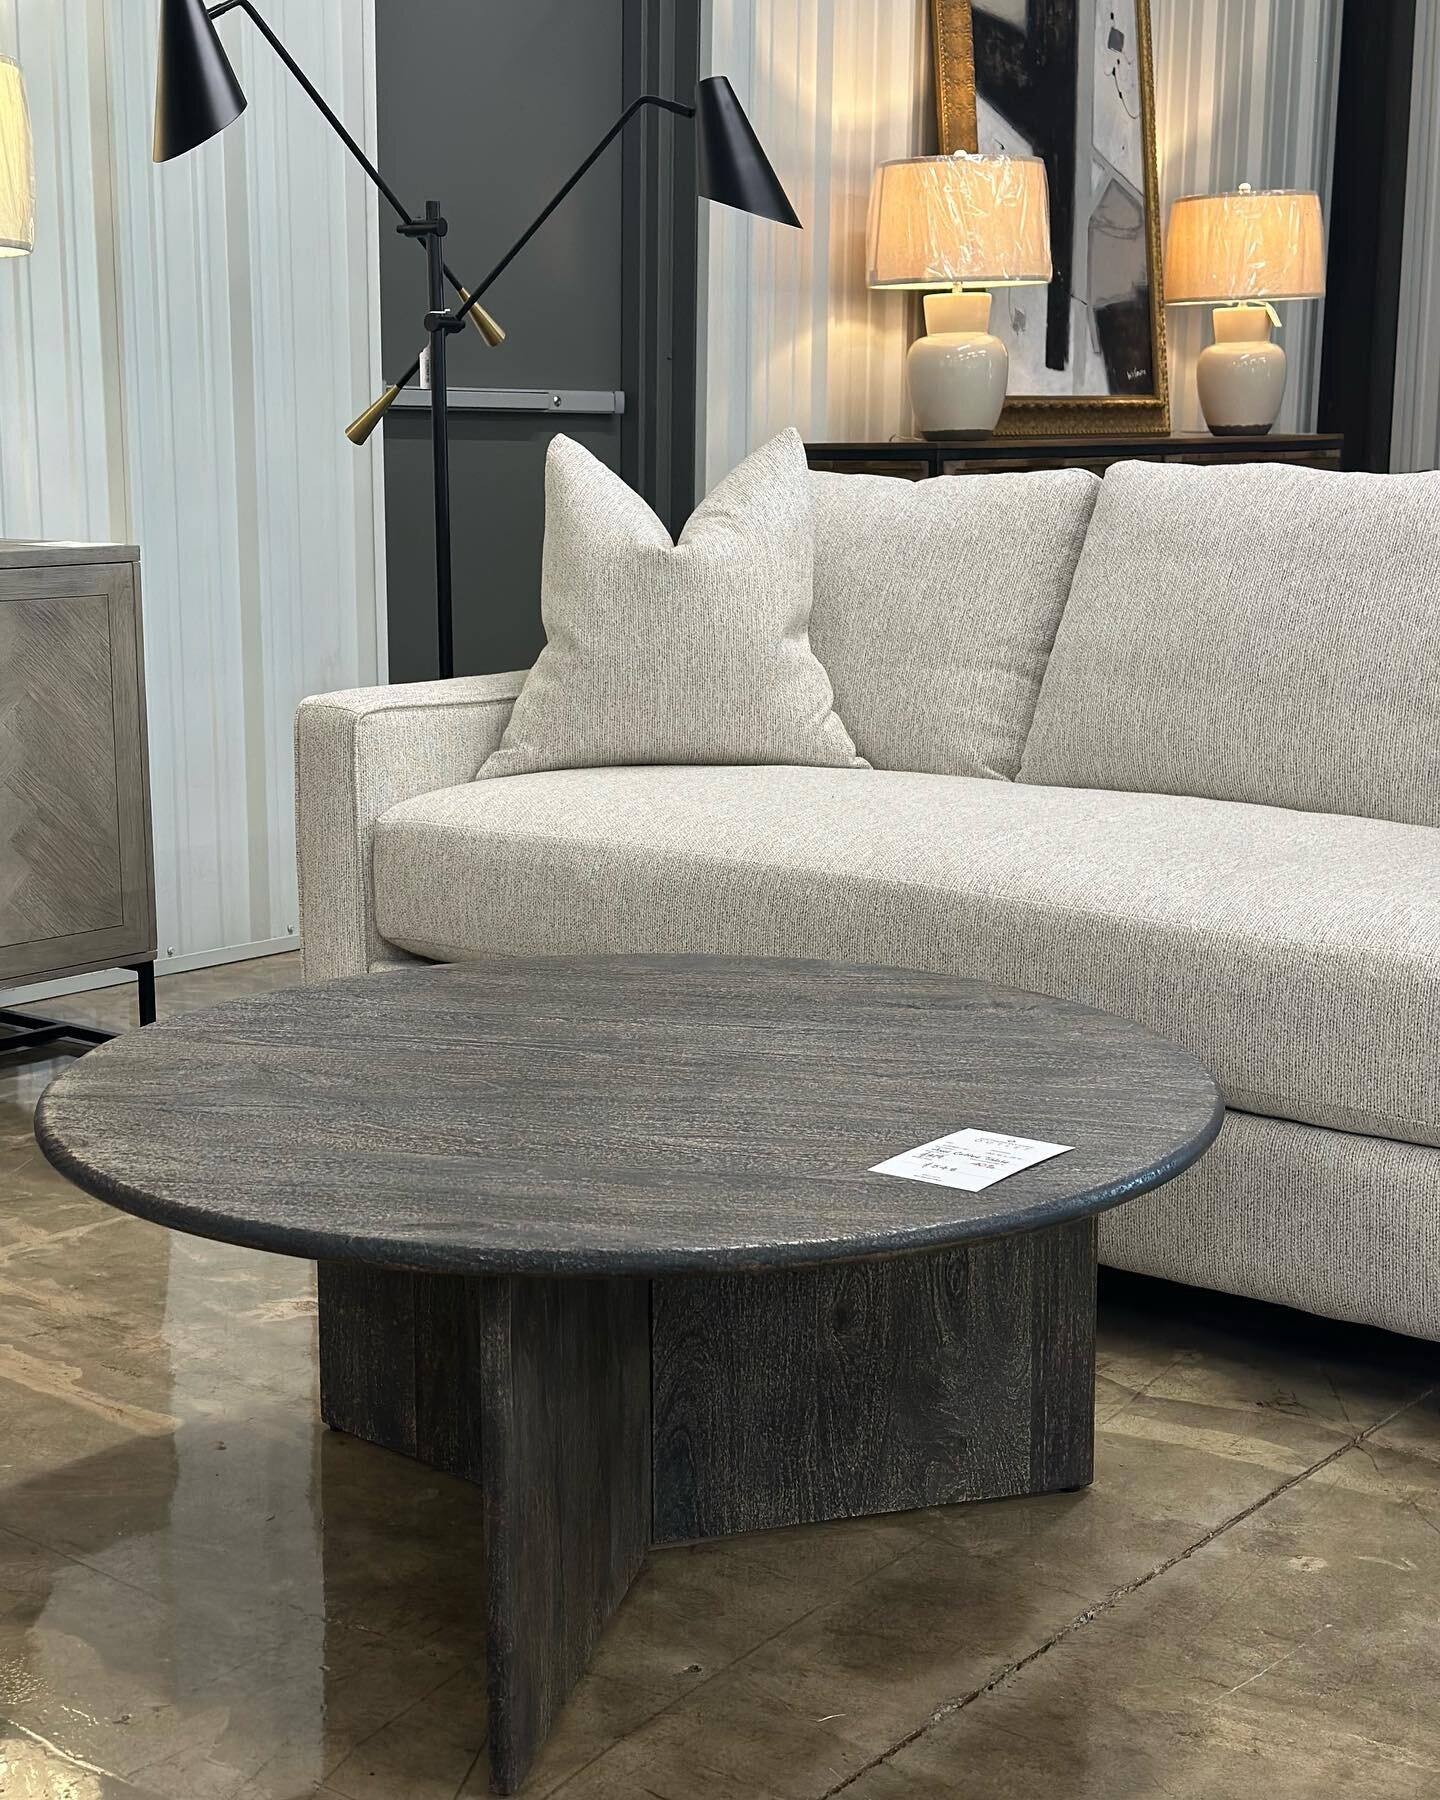 New product feature ✨ 

Our exclusive new Axel collection has arrived to our floor! The sleek, clean-line base and unique wood grain on the table top give these pieces a contemporary yet rustic feel. Available as a coffee and end table. Made of durab